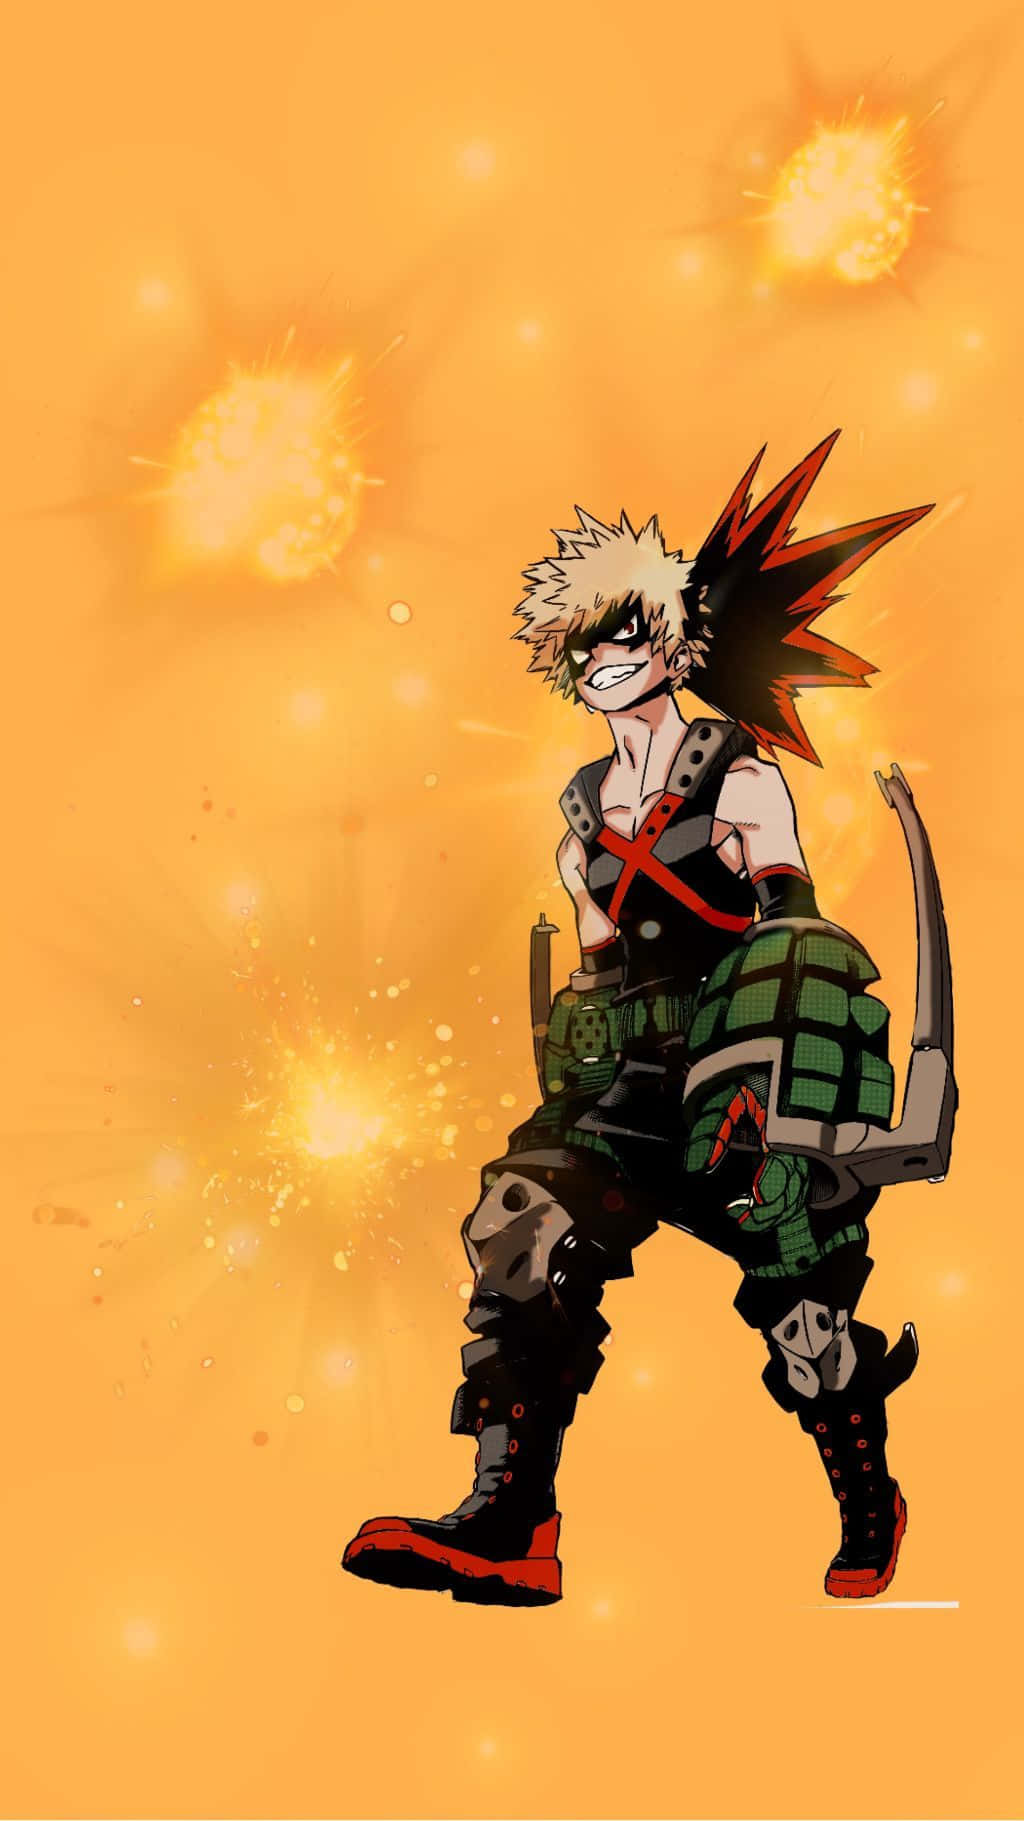 "Aesthetic of the bold and fiery, Bakugou" Wallpaper